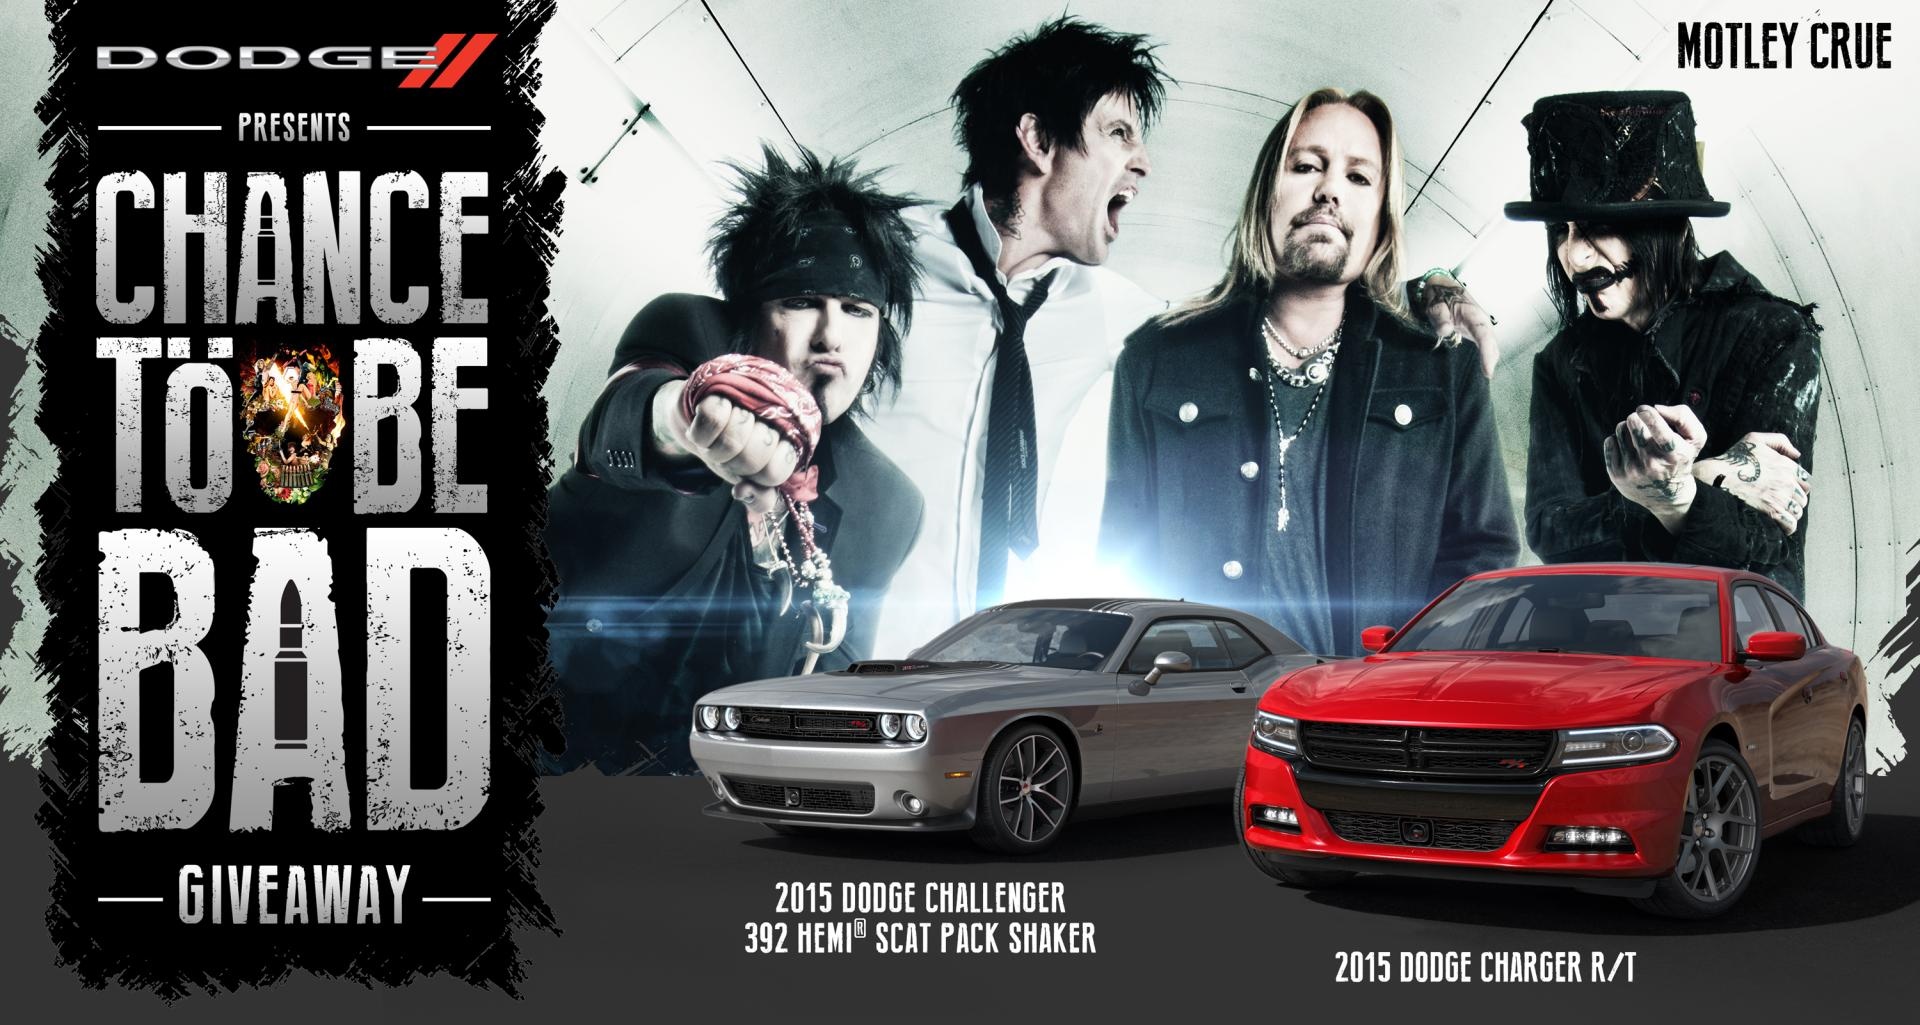 DODGE AND MÖTLEY CRÜE GIVE FANS A CHANCE TO BE BAD IN NATIONWIDE PROMOTION